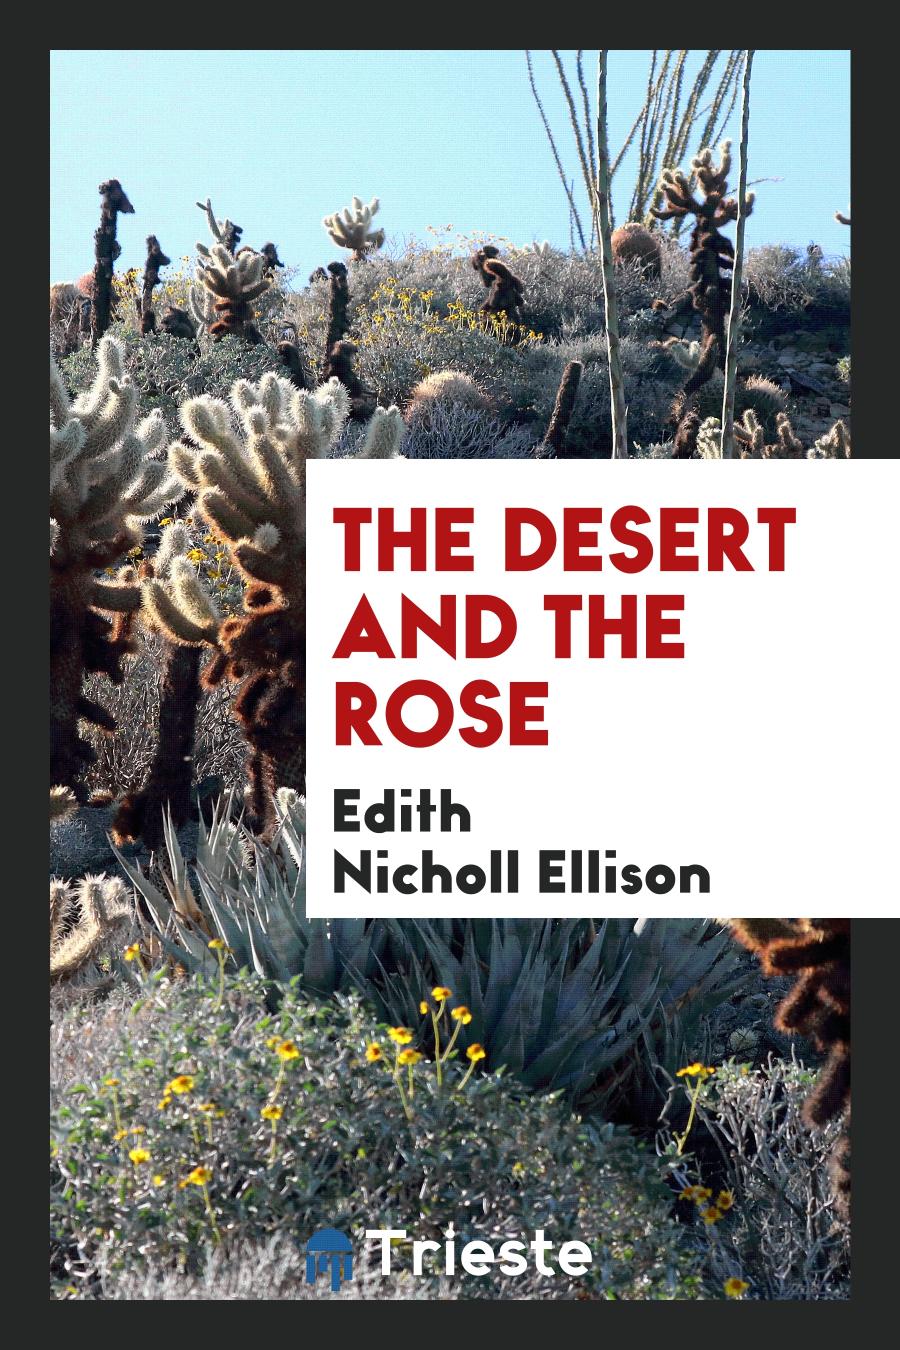 The Desert and the Rose